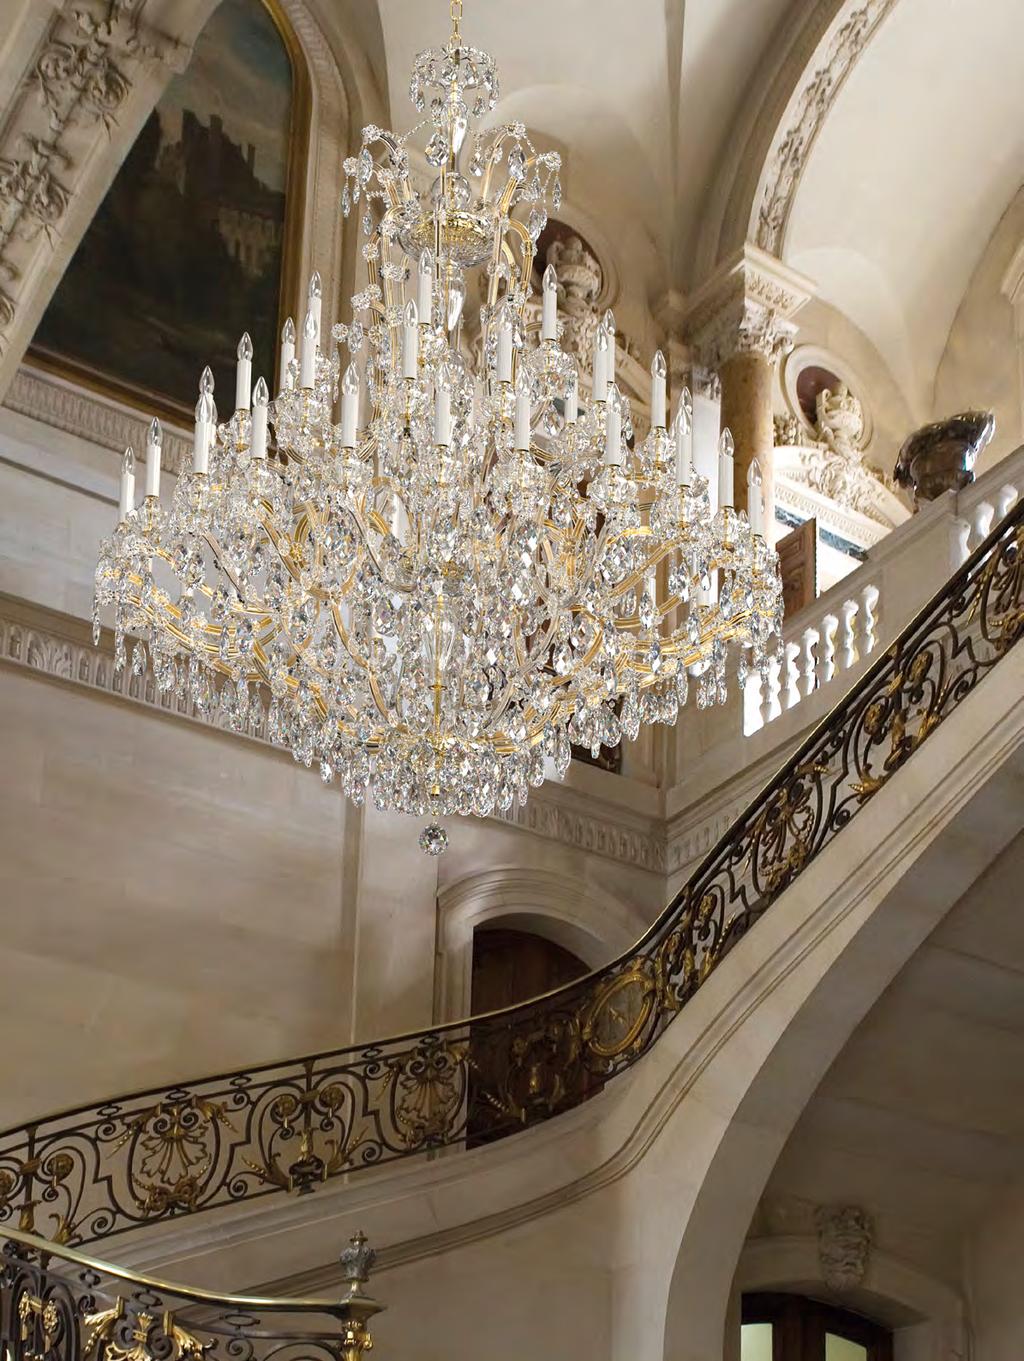 INTRODUCING Marie Therese lighting fixtures Marie Therese lighting fixtures are guaranteed to impress guests in your sitting room, just as in luxury palaces, residences and villas.